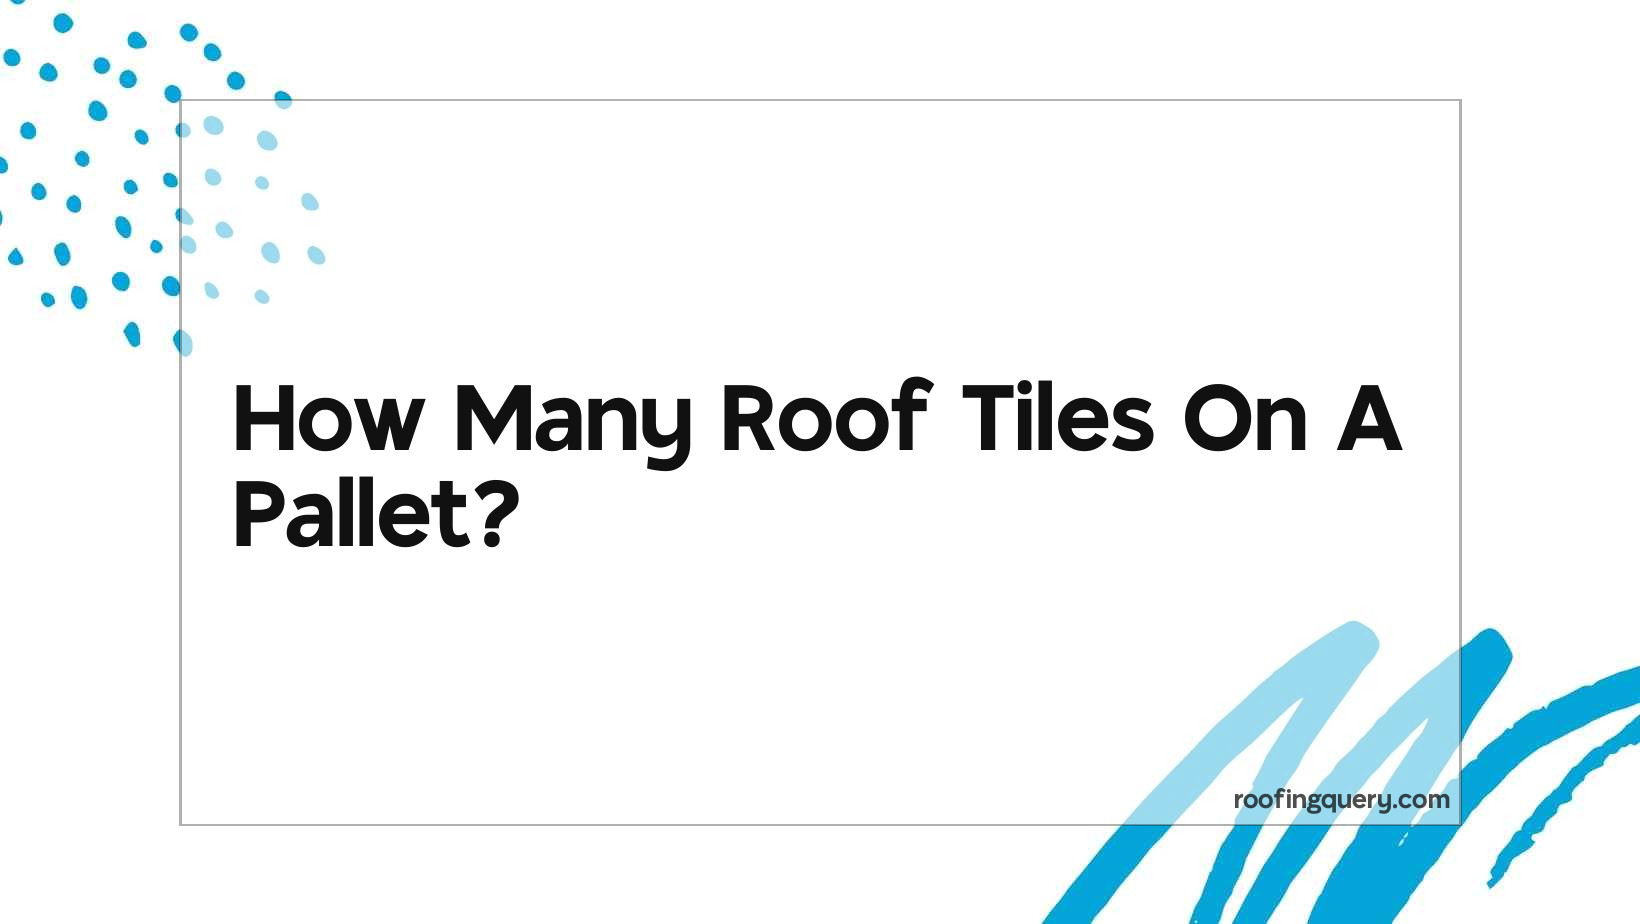 How Many Roof Tiles On A Pallet?